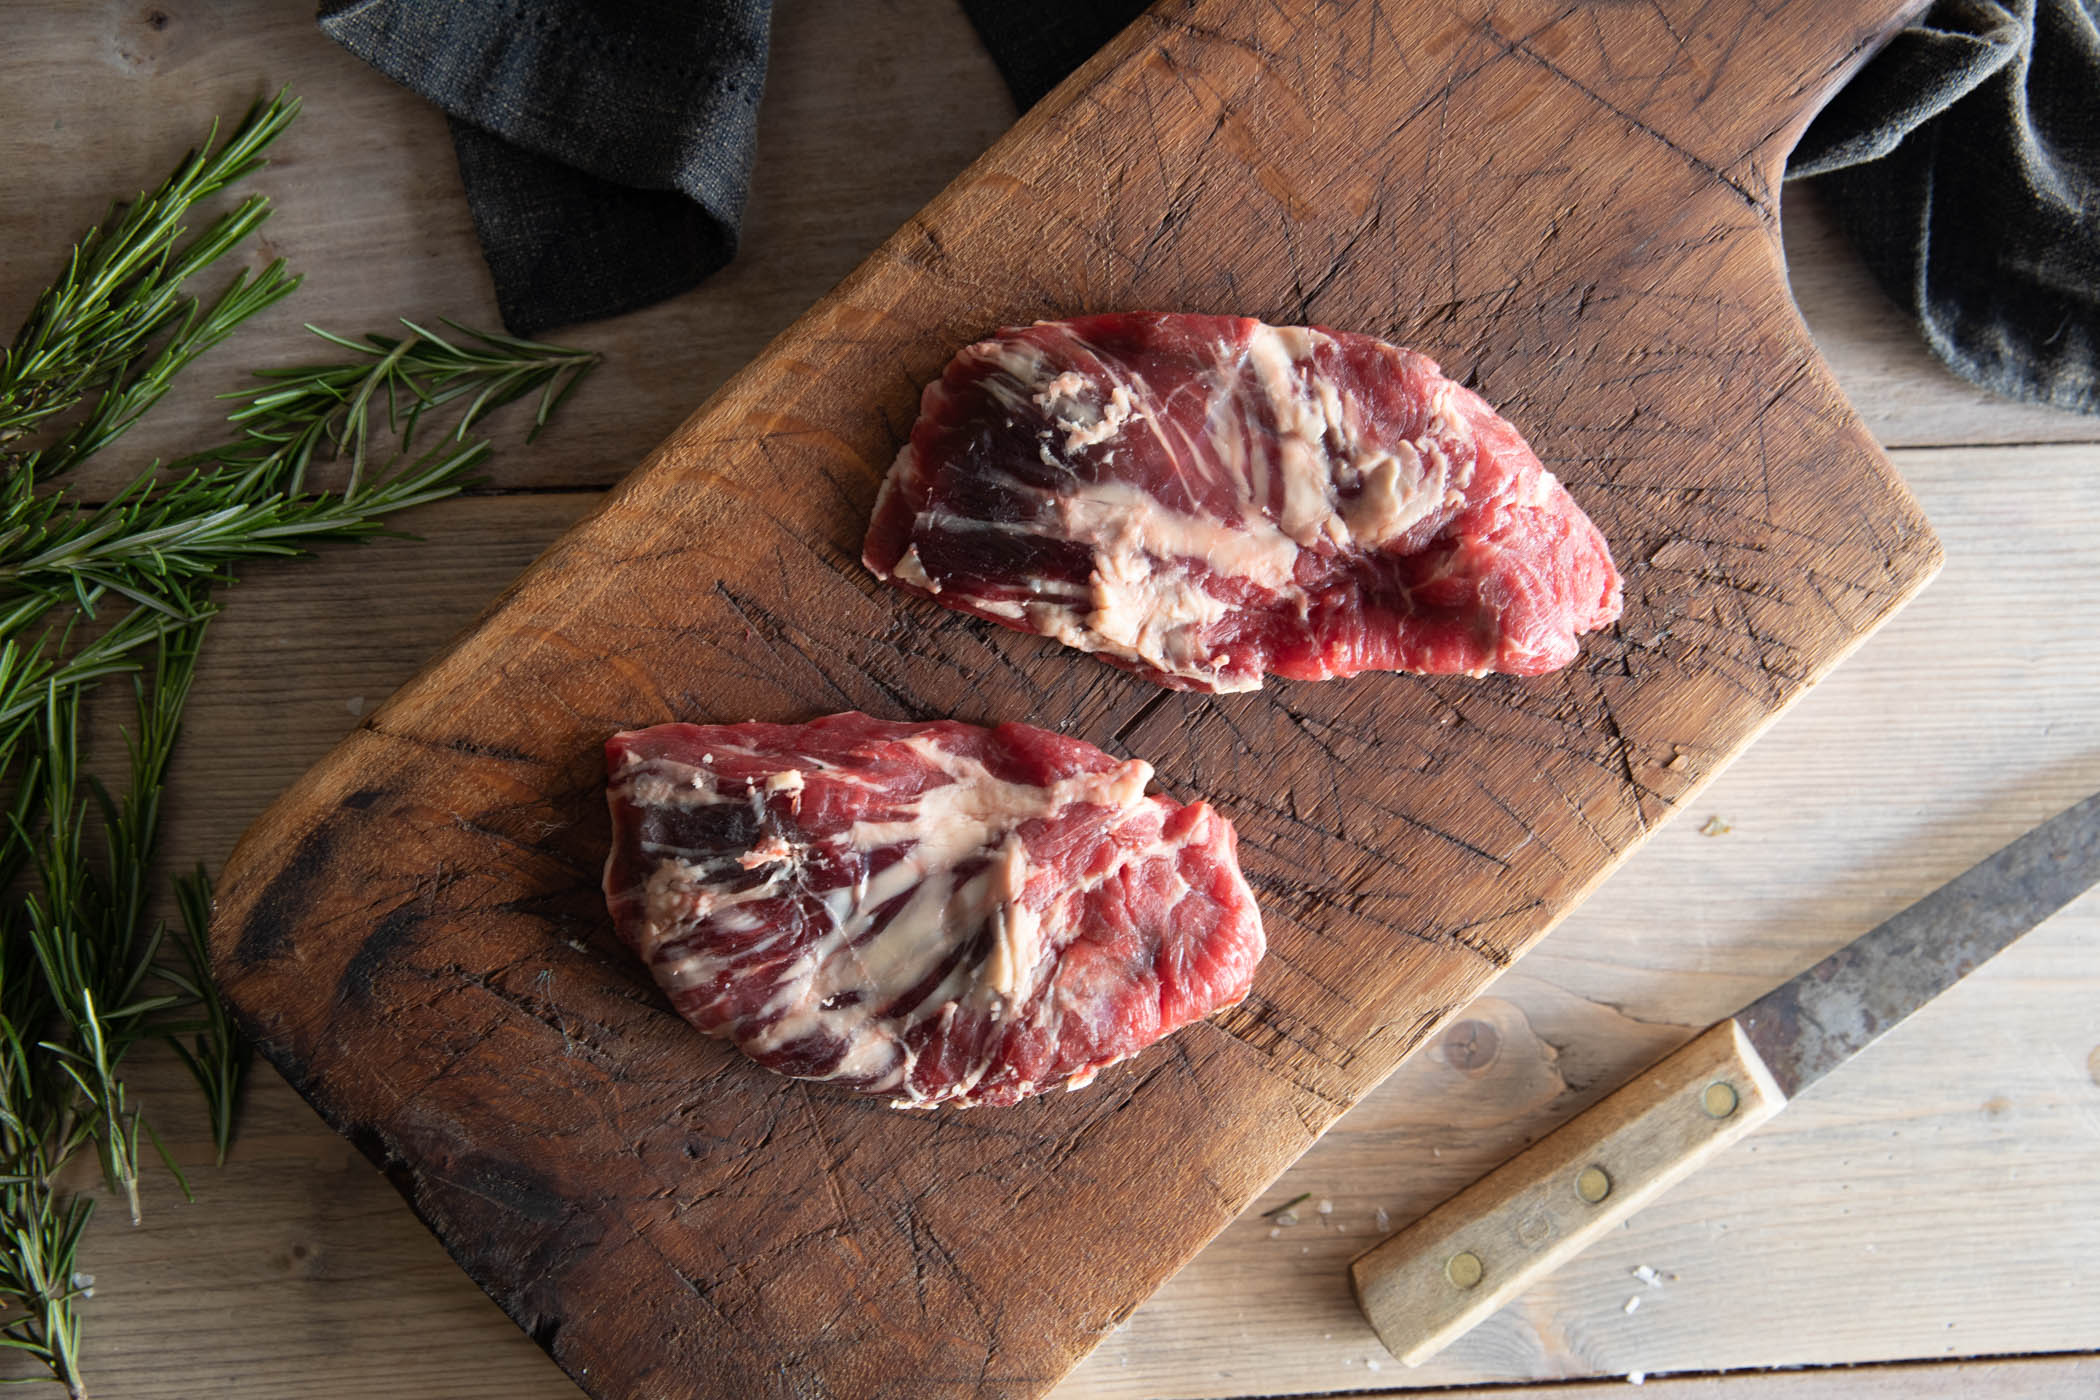 Bird's eye view of raw spider steaks on a wooden board with rosemary and a knife either side.